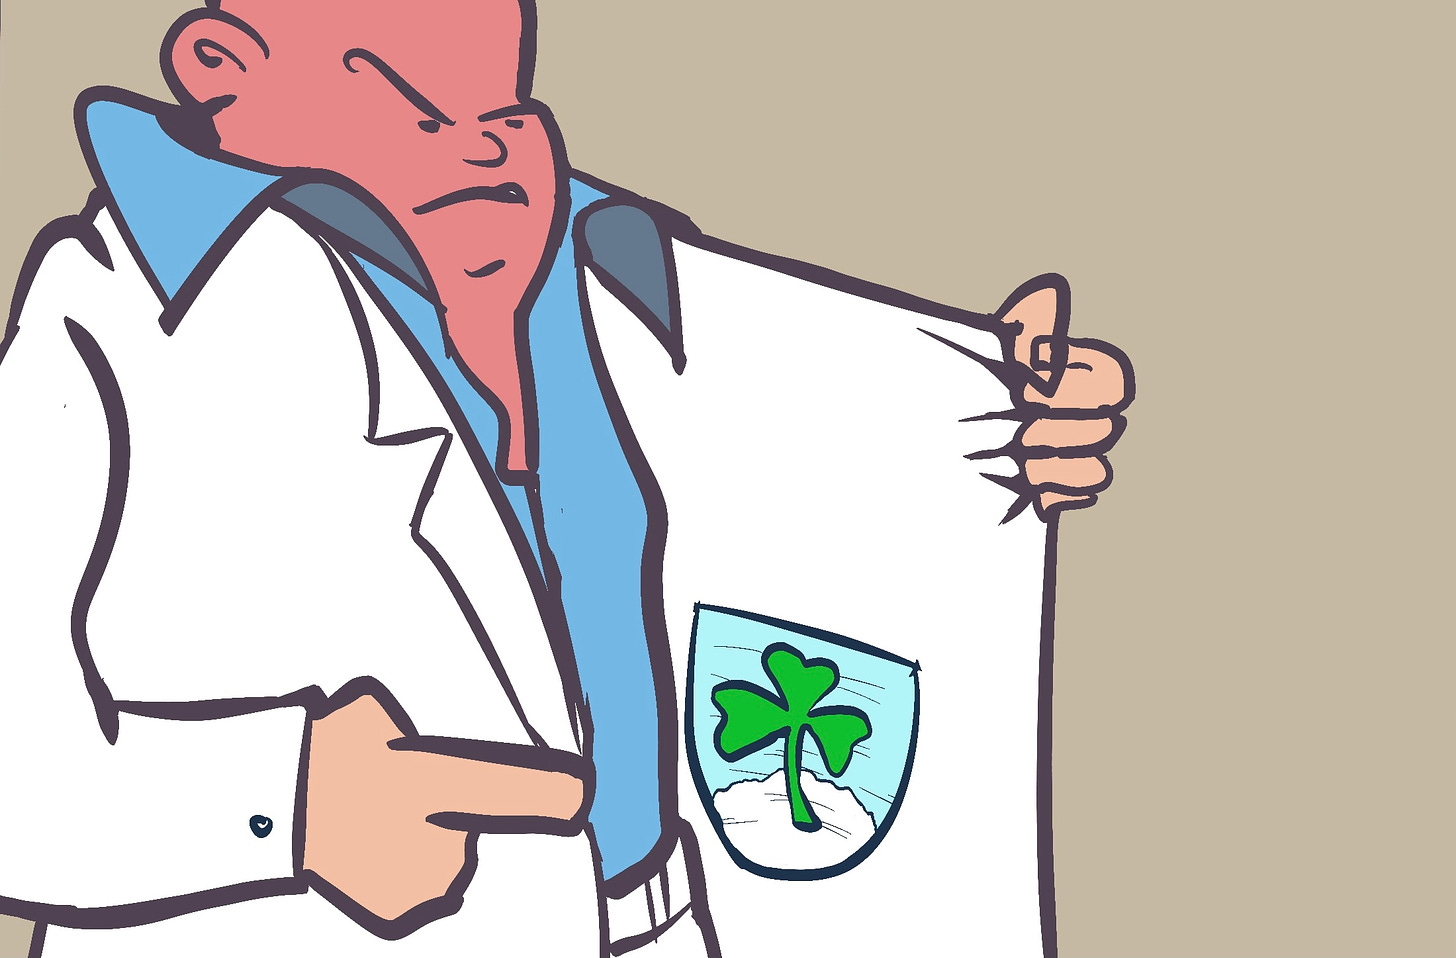 An illustration of Dana White opening his coat to reveal an bag of cocaine emblazoned with a shamrock.